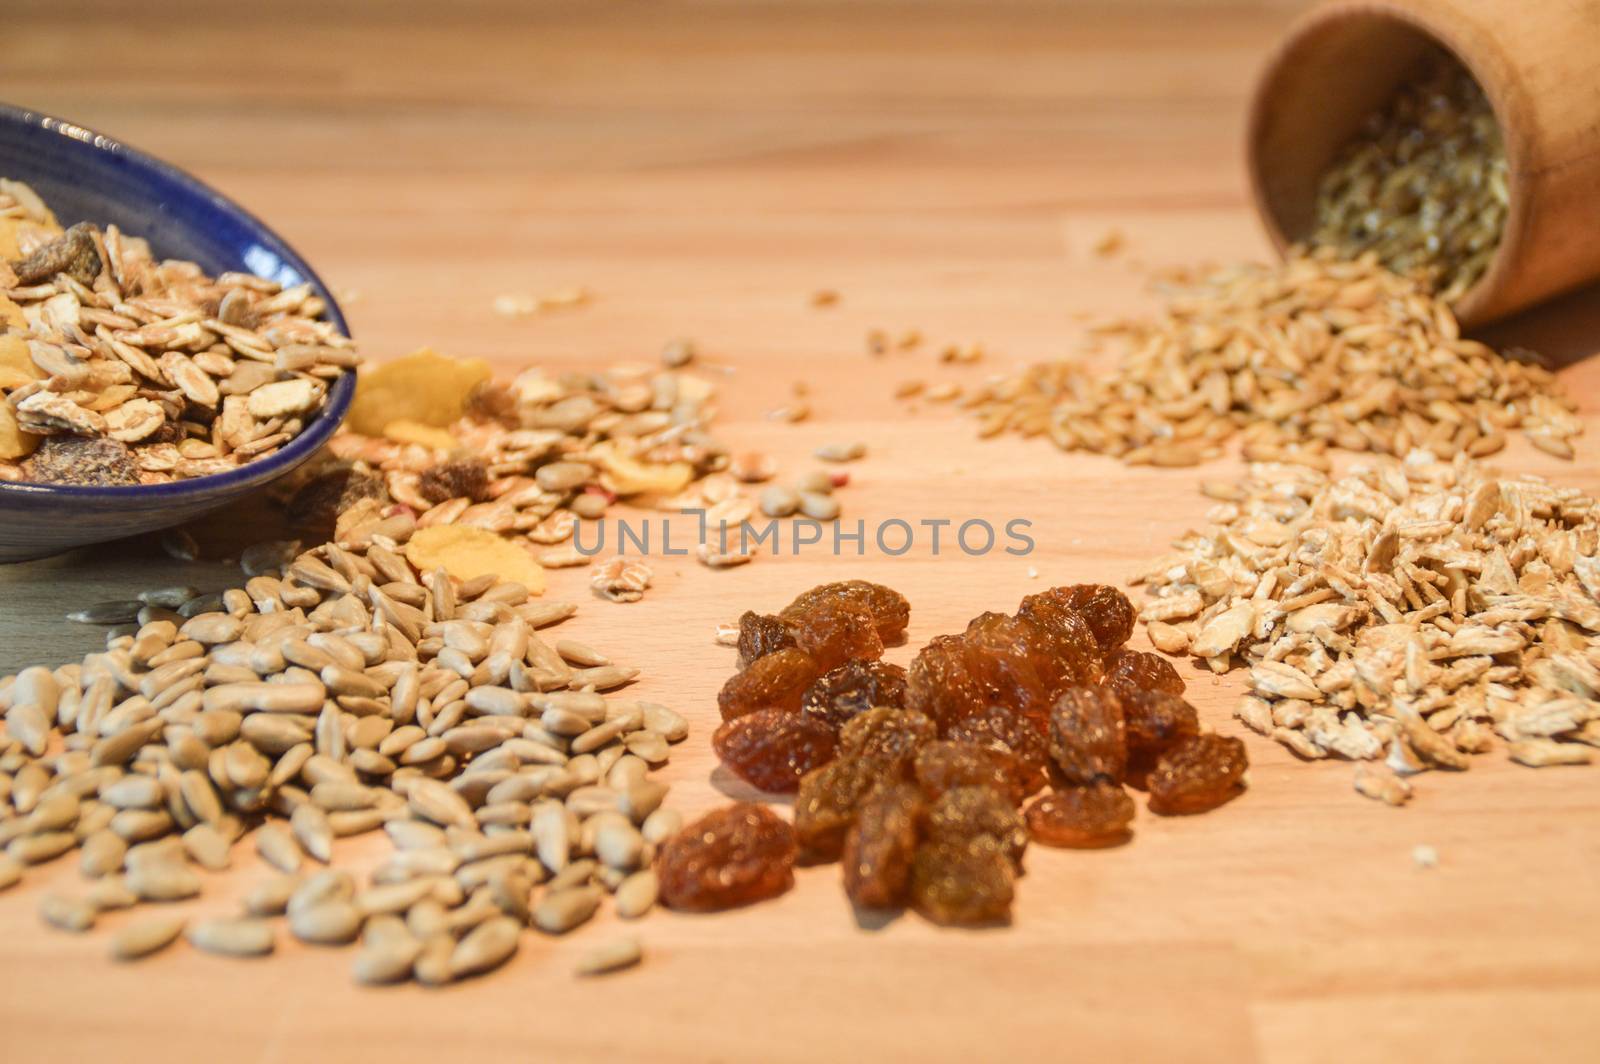 Grains and raisins for baking bread by Sonnet15